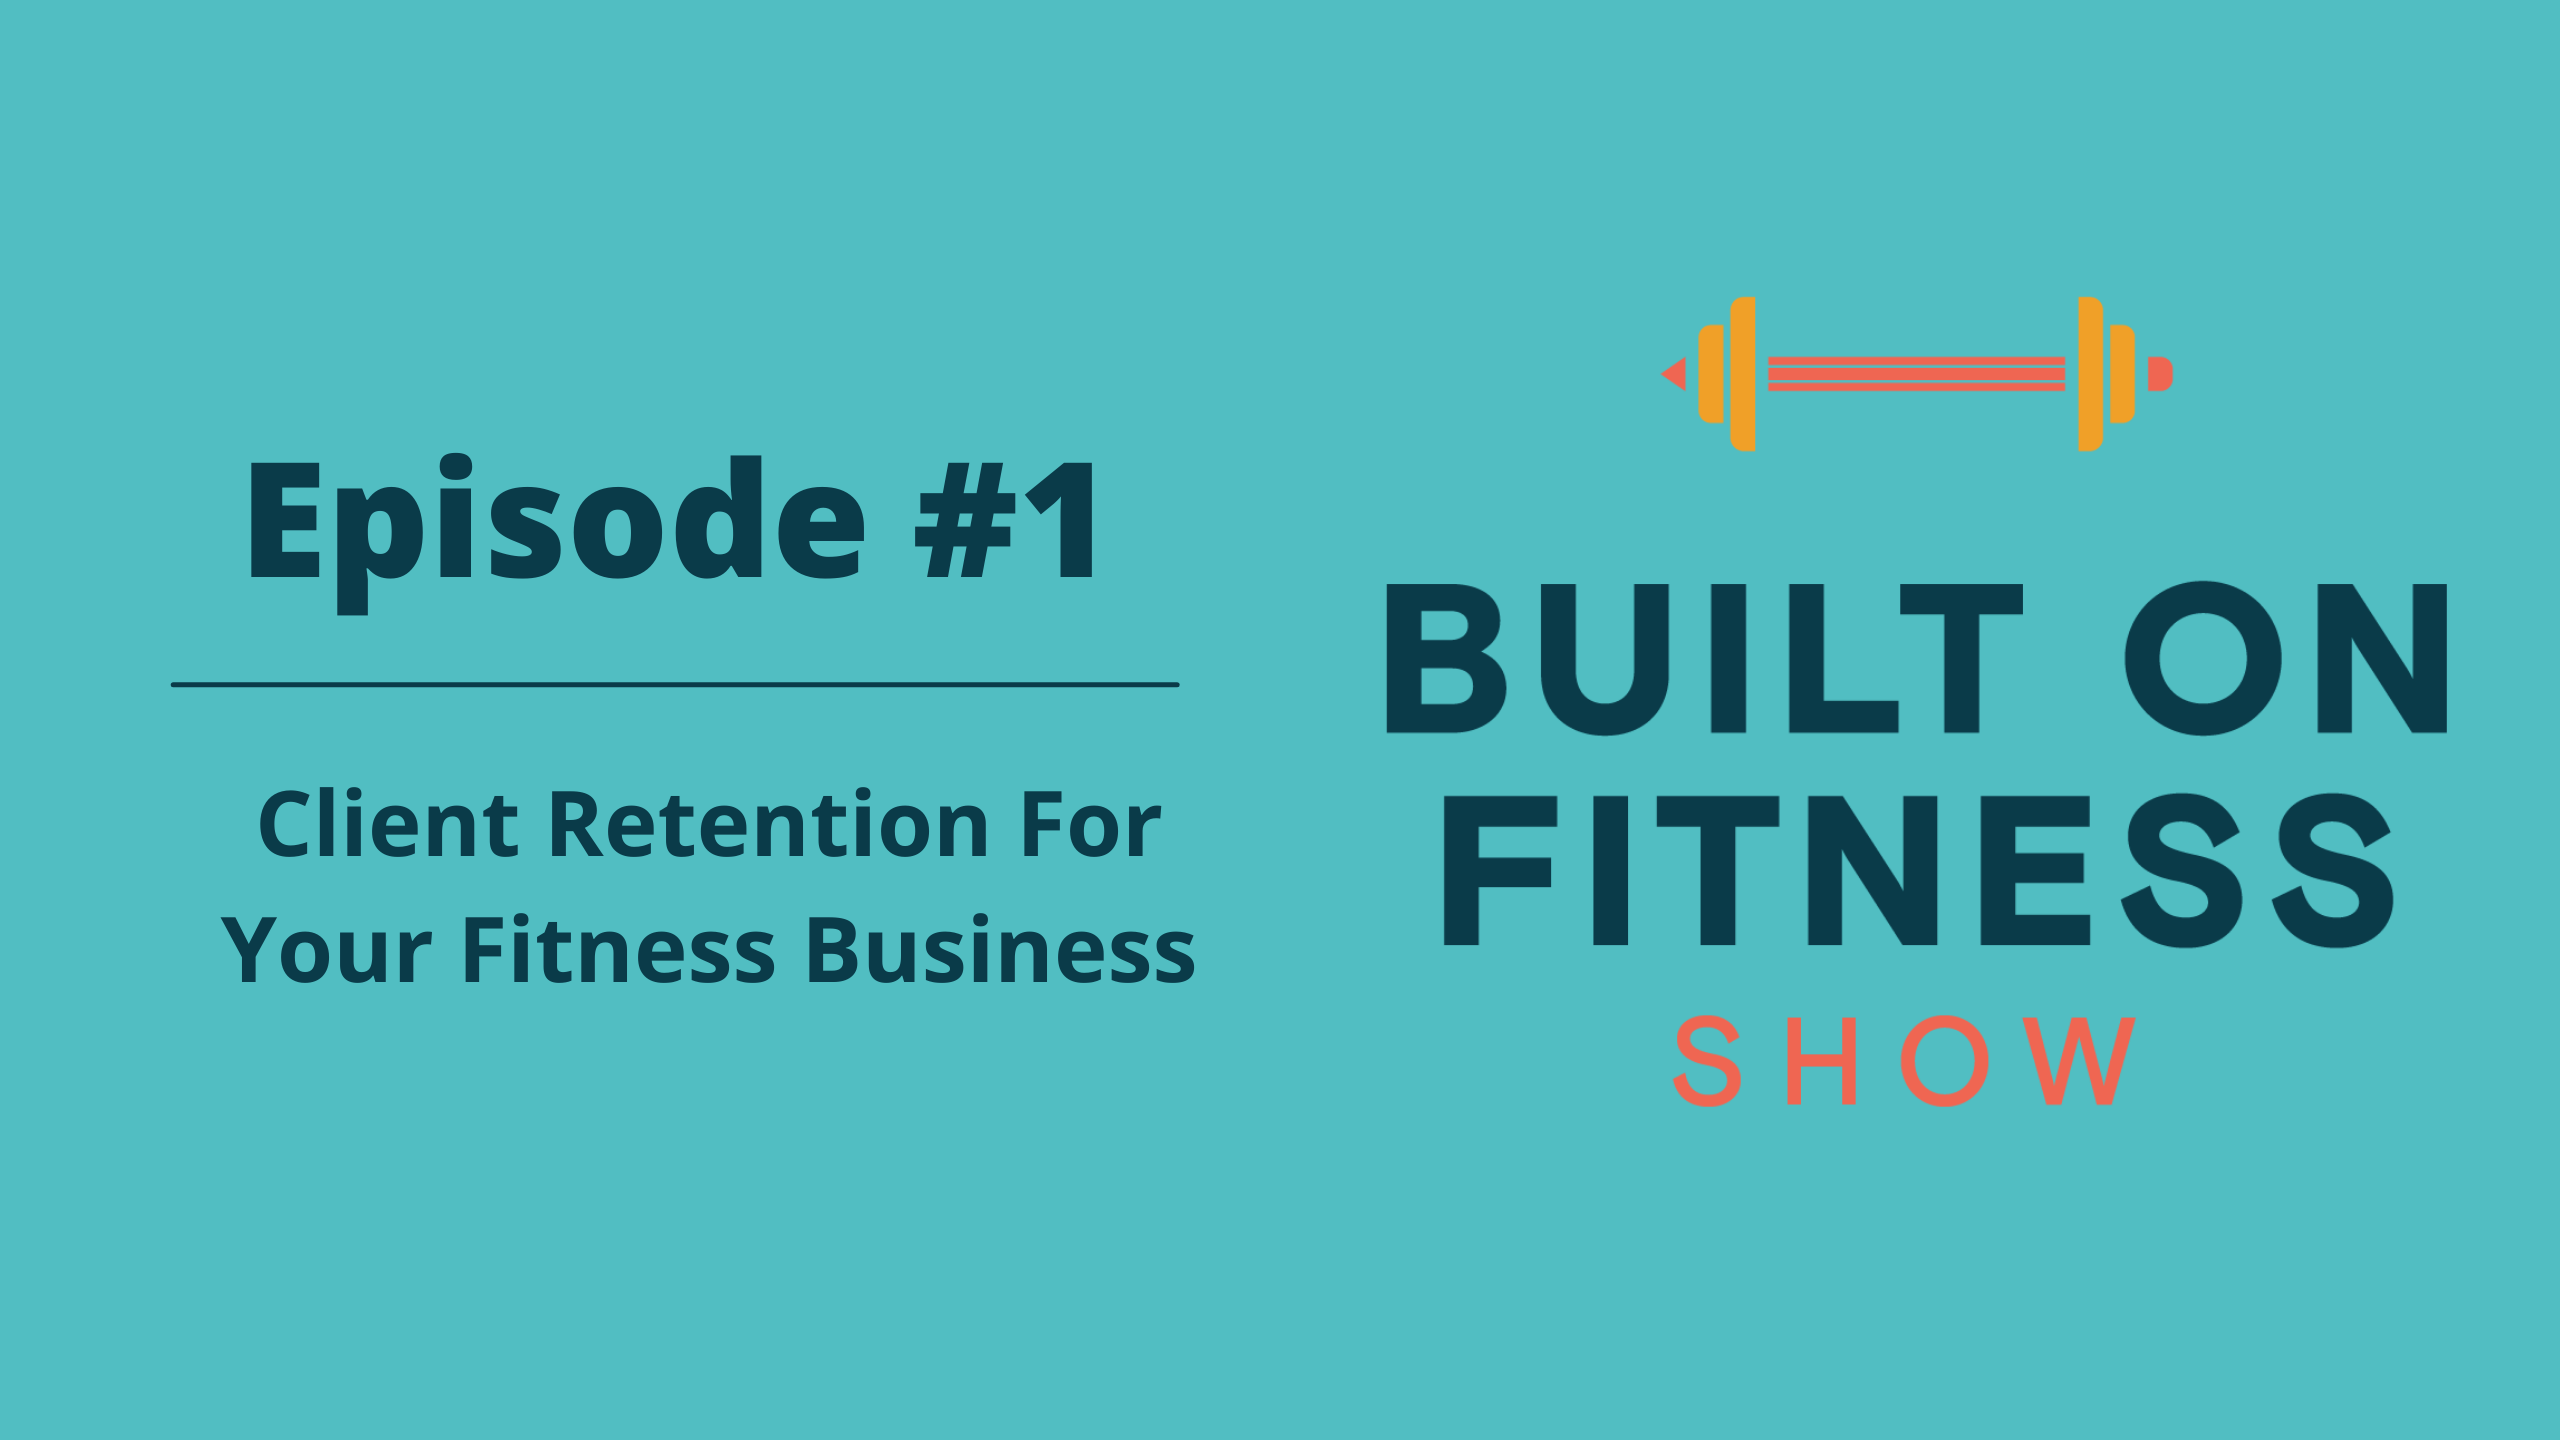 Built On Fitness Show Episode 1 Recap: How to Retain Your Clients Amidst COVID-19